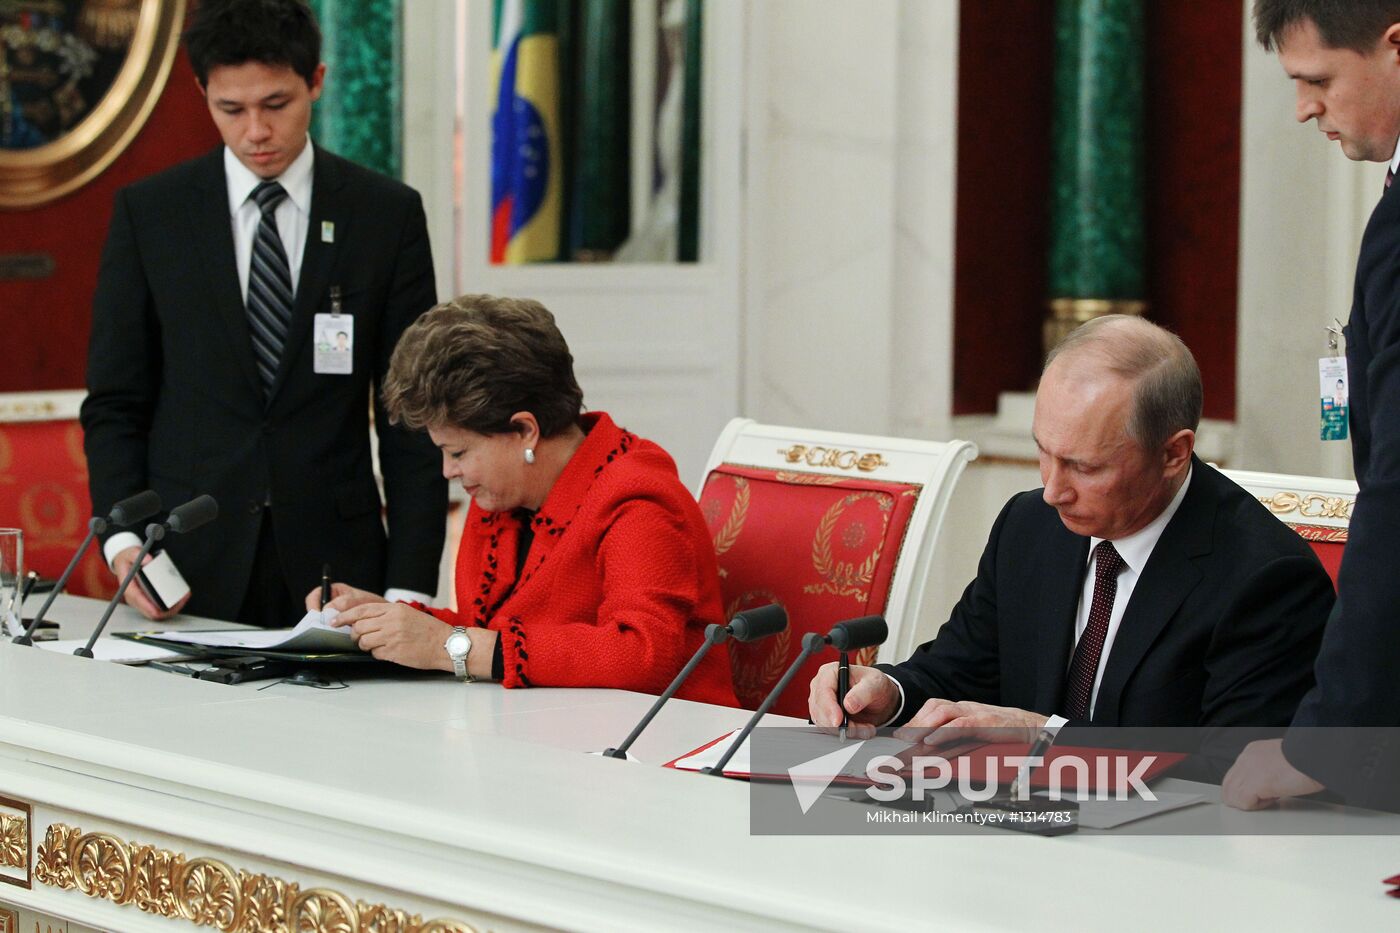 Vladimir Putin and Dilma Rousseff meet in Moscow